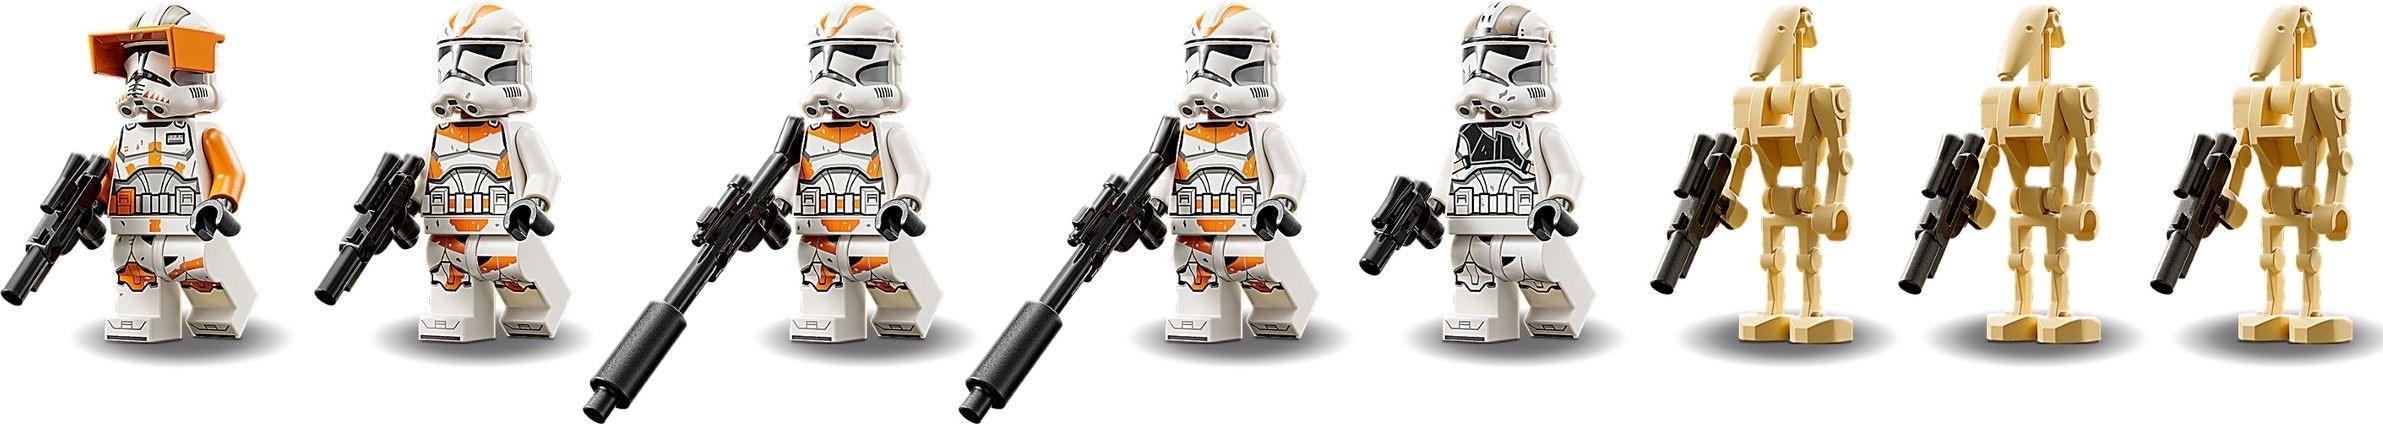 Brickset on X: Commander Cody, the time has come Look out for our  review of #LEGO 75337 AT-TE Walker very soon! #LEGOStarWars #StarWars   / X